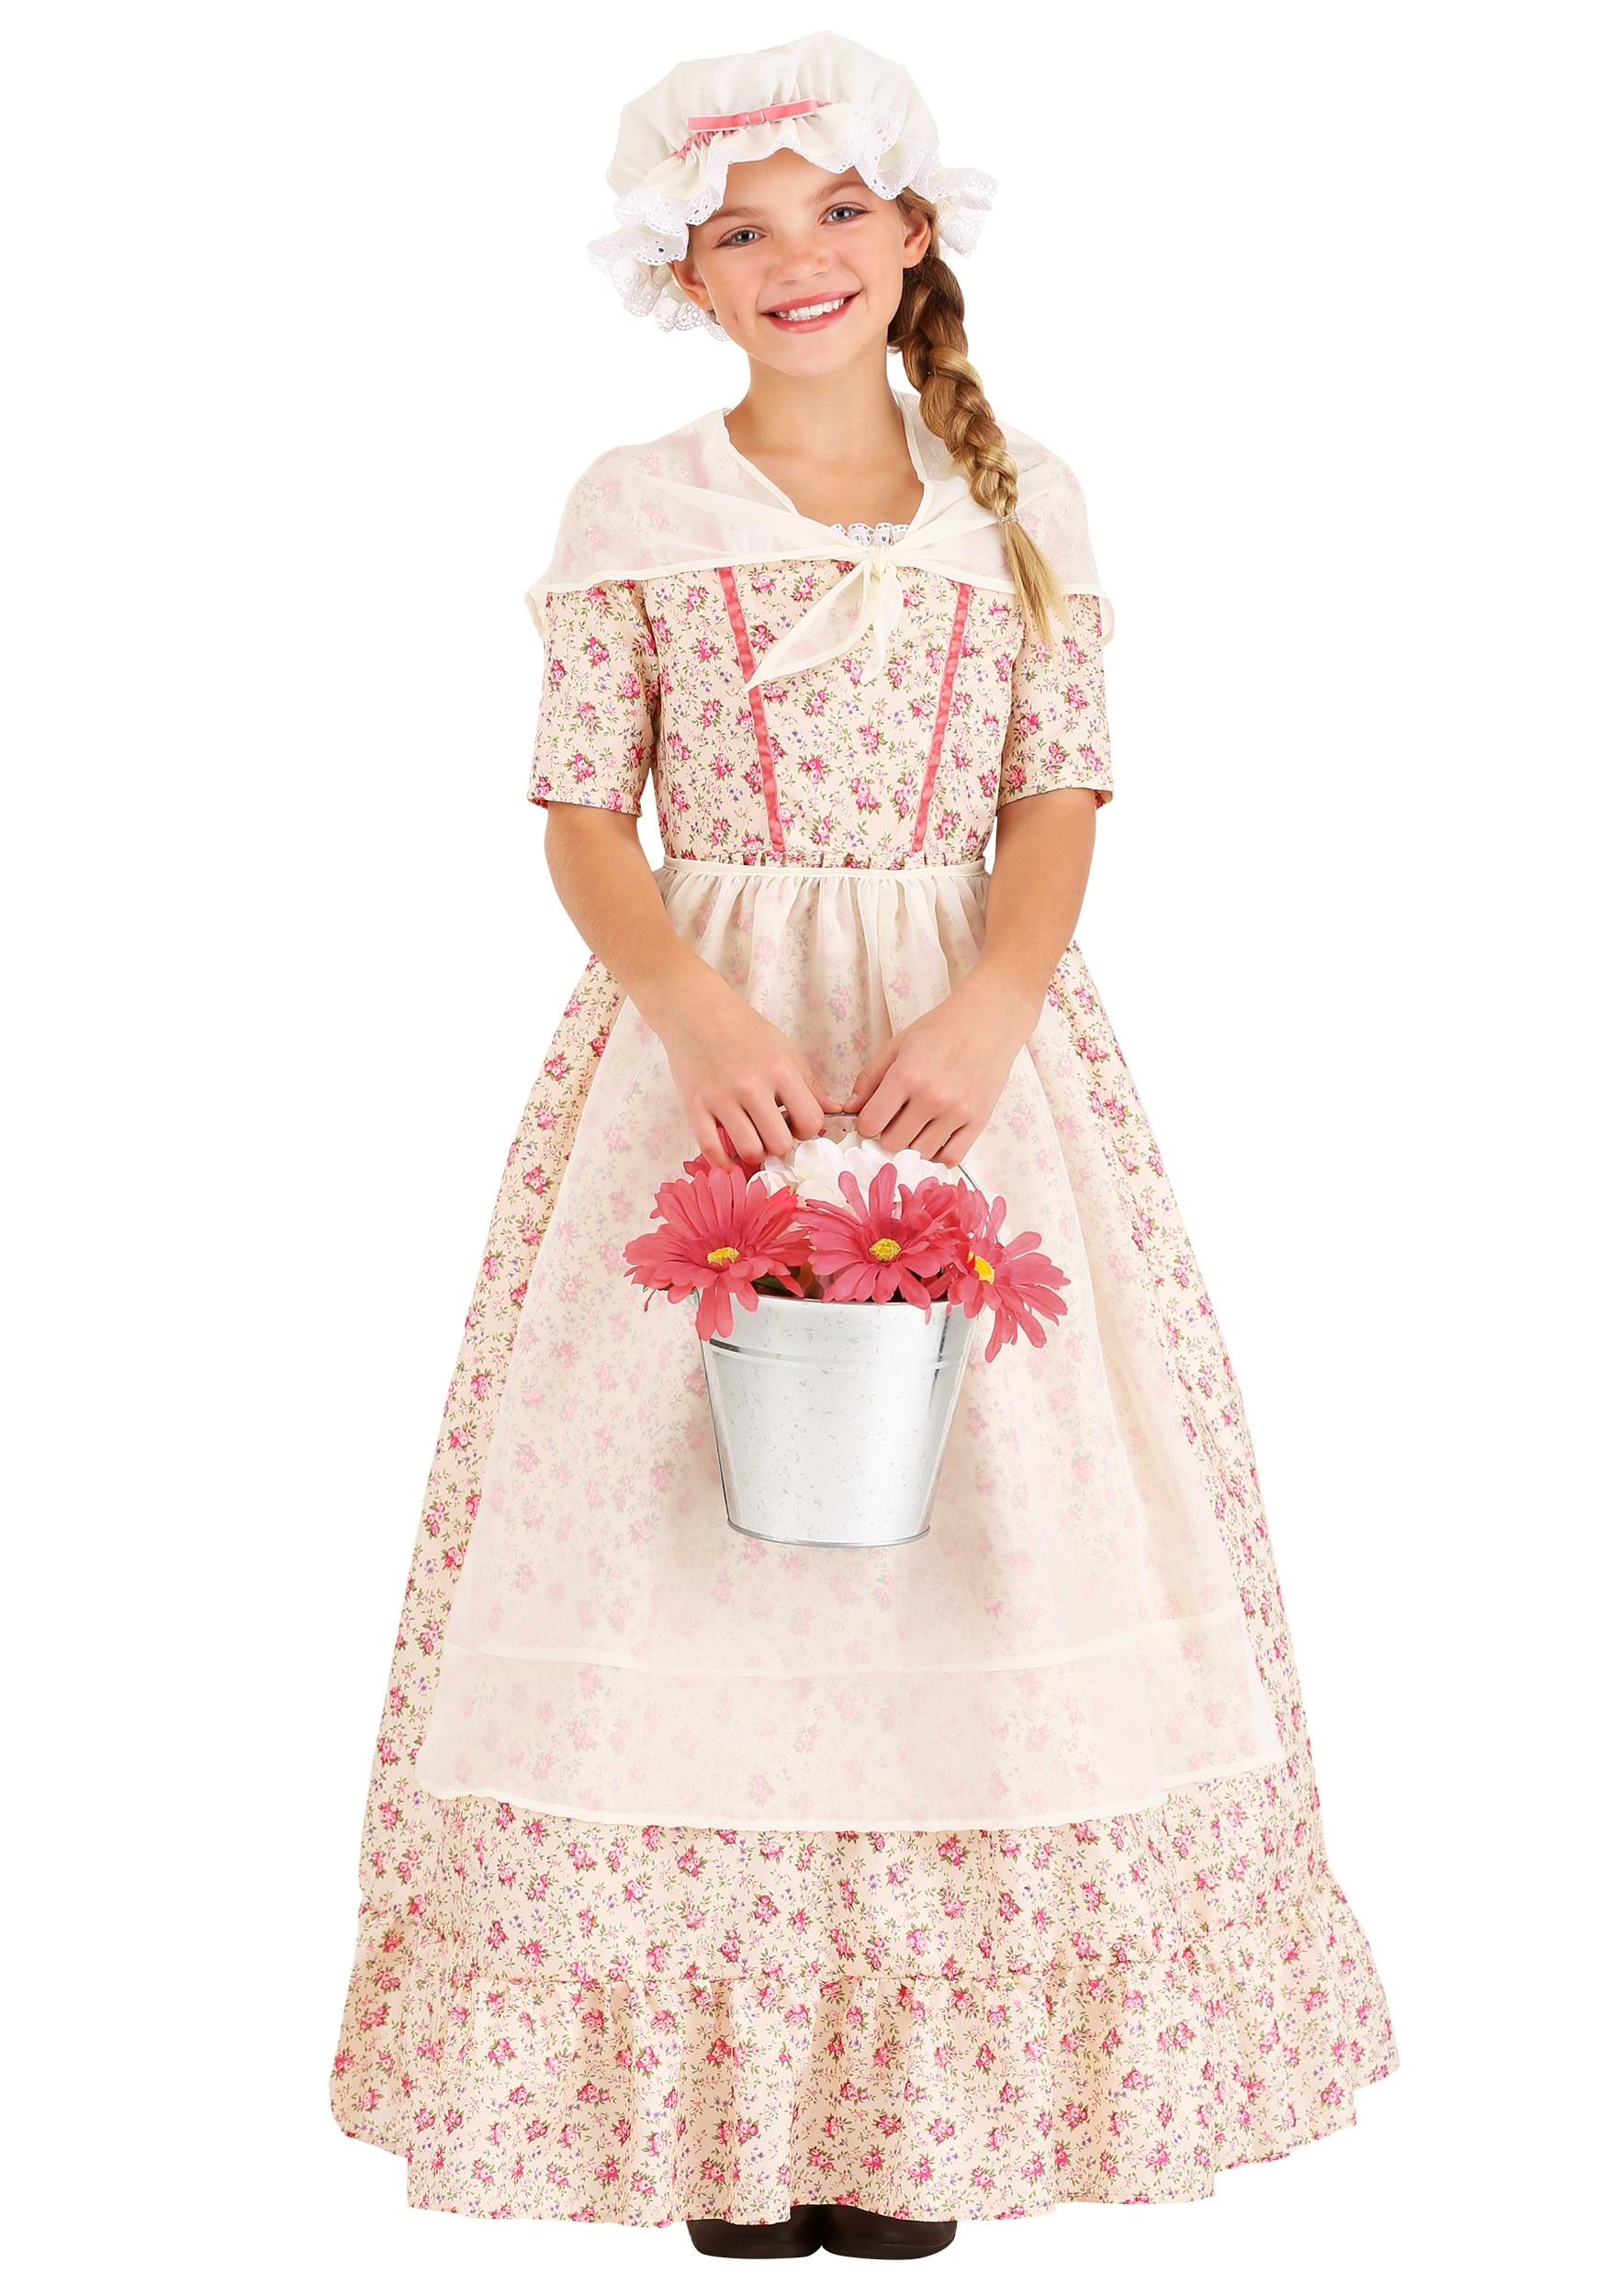 Colonial Girl Child Costume Dress and Mop Cap Size Medium 8-10